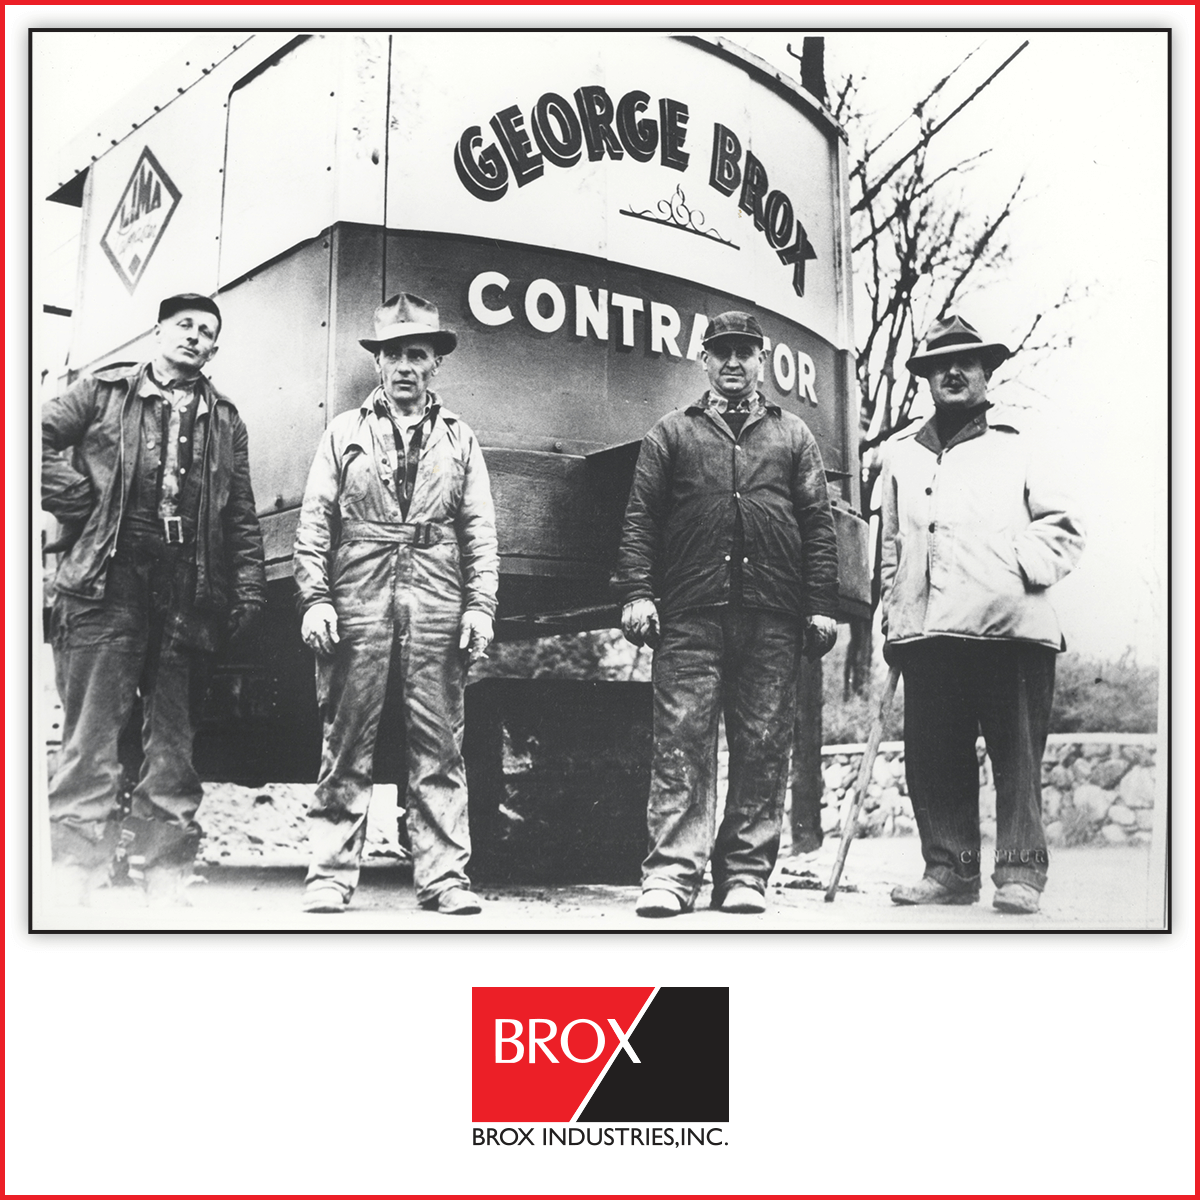 Because our company is still privately owned and operated by the family who founded it, you can expect our commitment to excellence to remain as vigorous and steadfast as ever. #BroxStrong #BroxTeam #TeamBrox #Brox #BroxIndustries #teamwork #greatplacetowork #corevalues #family